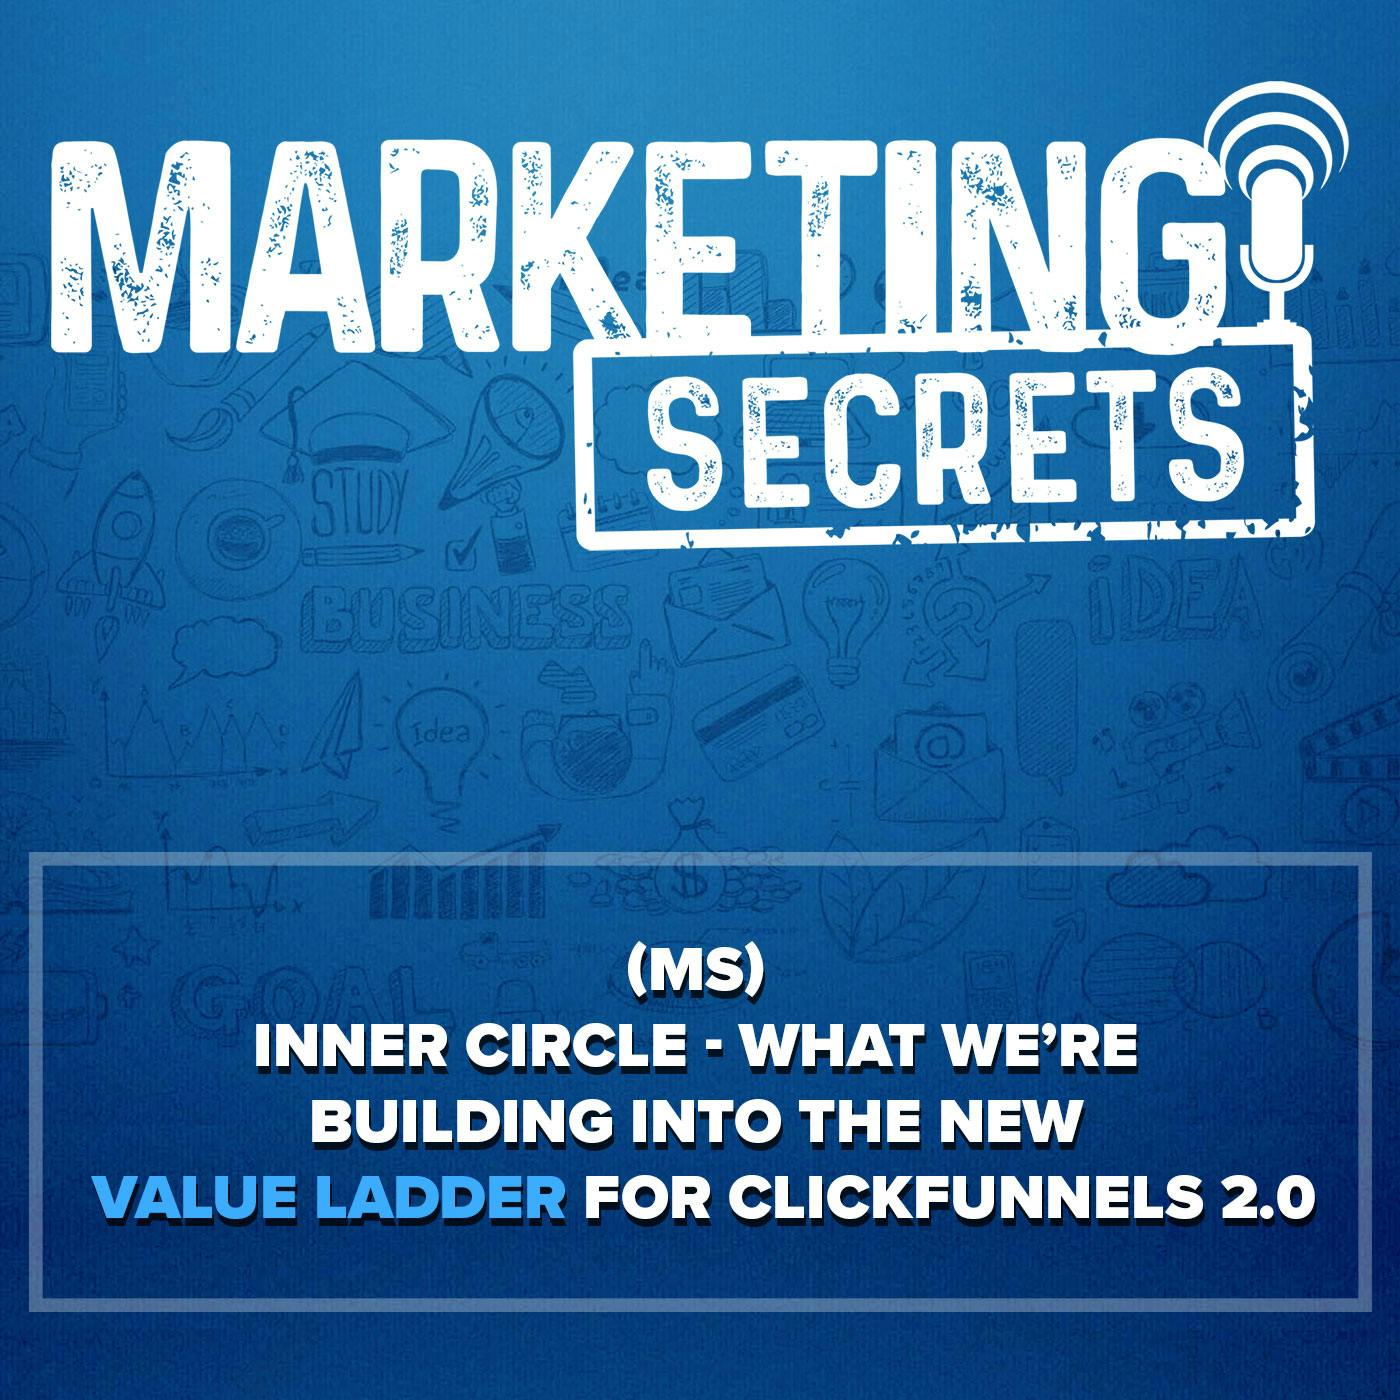 (MS) Inner Circle - What We’re Building Into The NEW Value Ladder for ClickFunnels 2.0